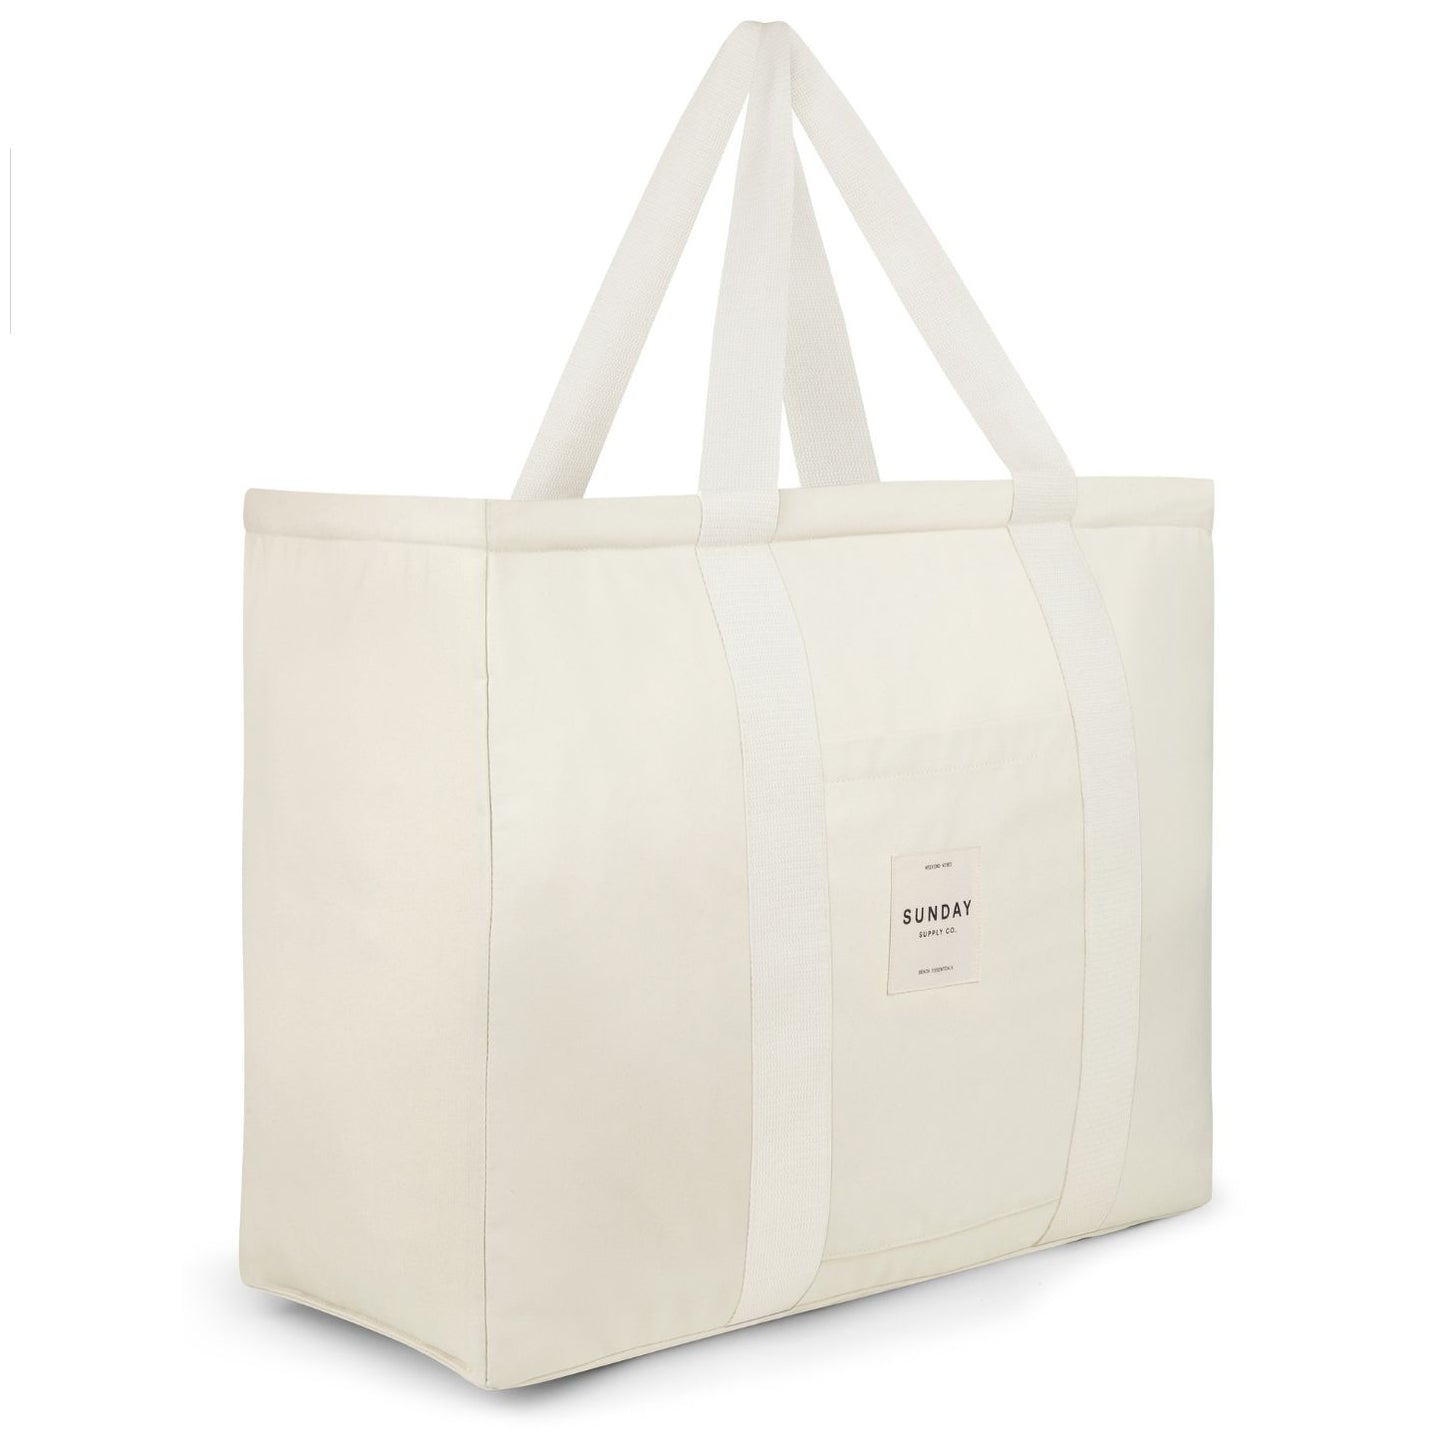 Dunes Canvas Beach Tote Bag: Large, Comfy, & Easy to Carry | Sunday ...